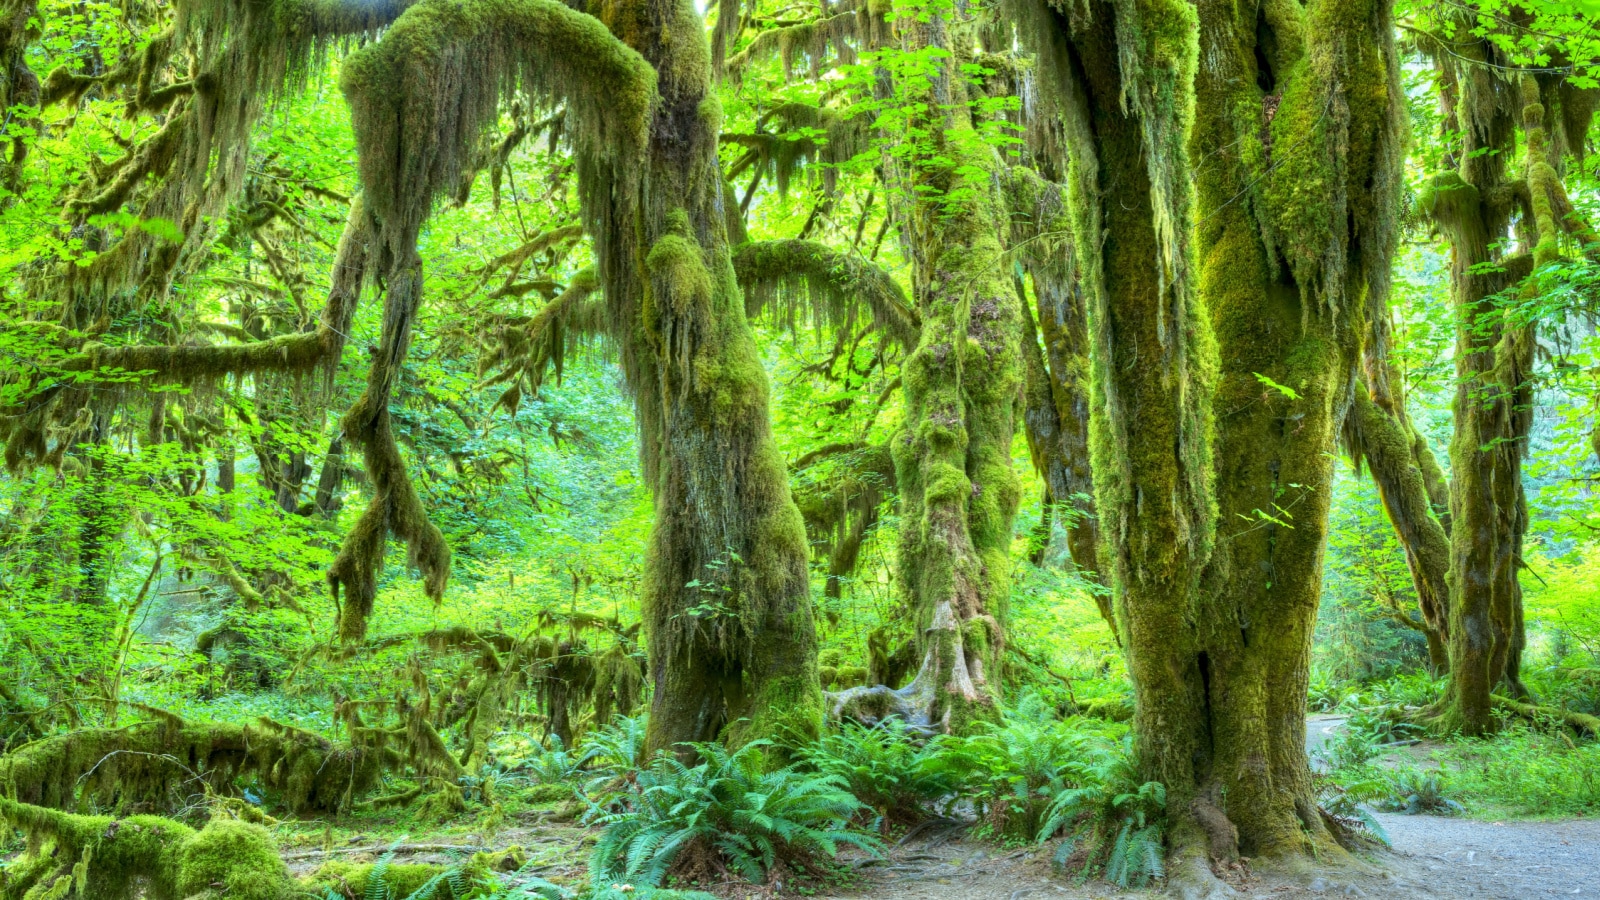 Olympic National Park/Hoh Rainforest. The Epic Hall Of Mosses Trail.Trees covered in moss in a temperate Hoh Rain Forest.